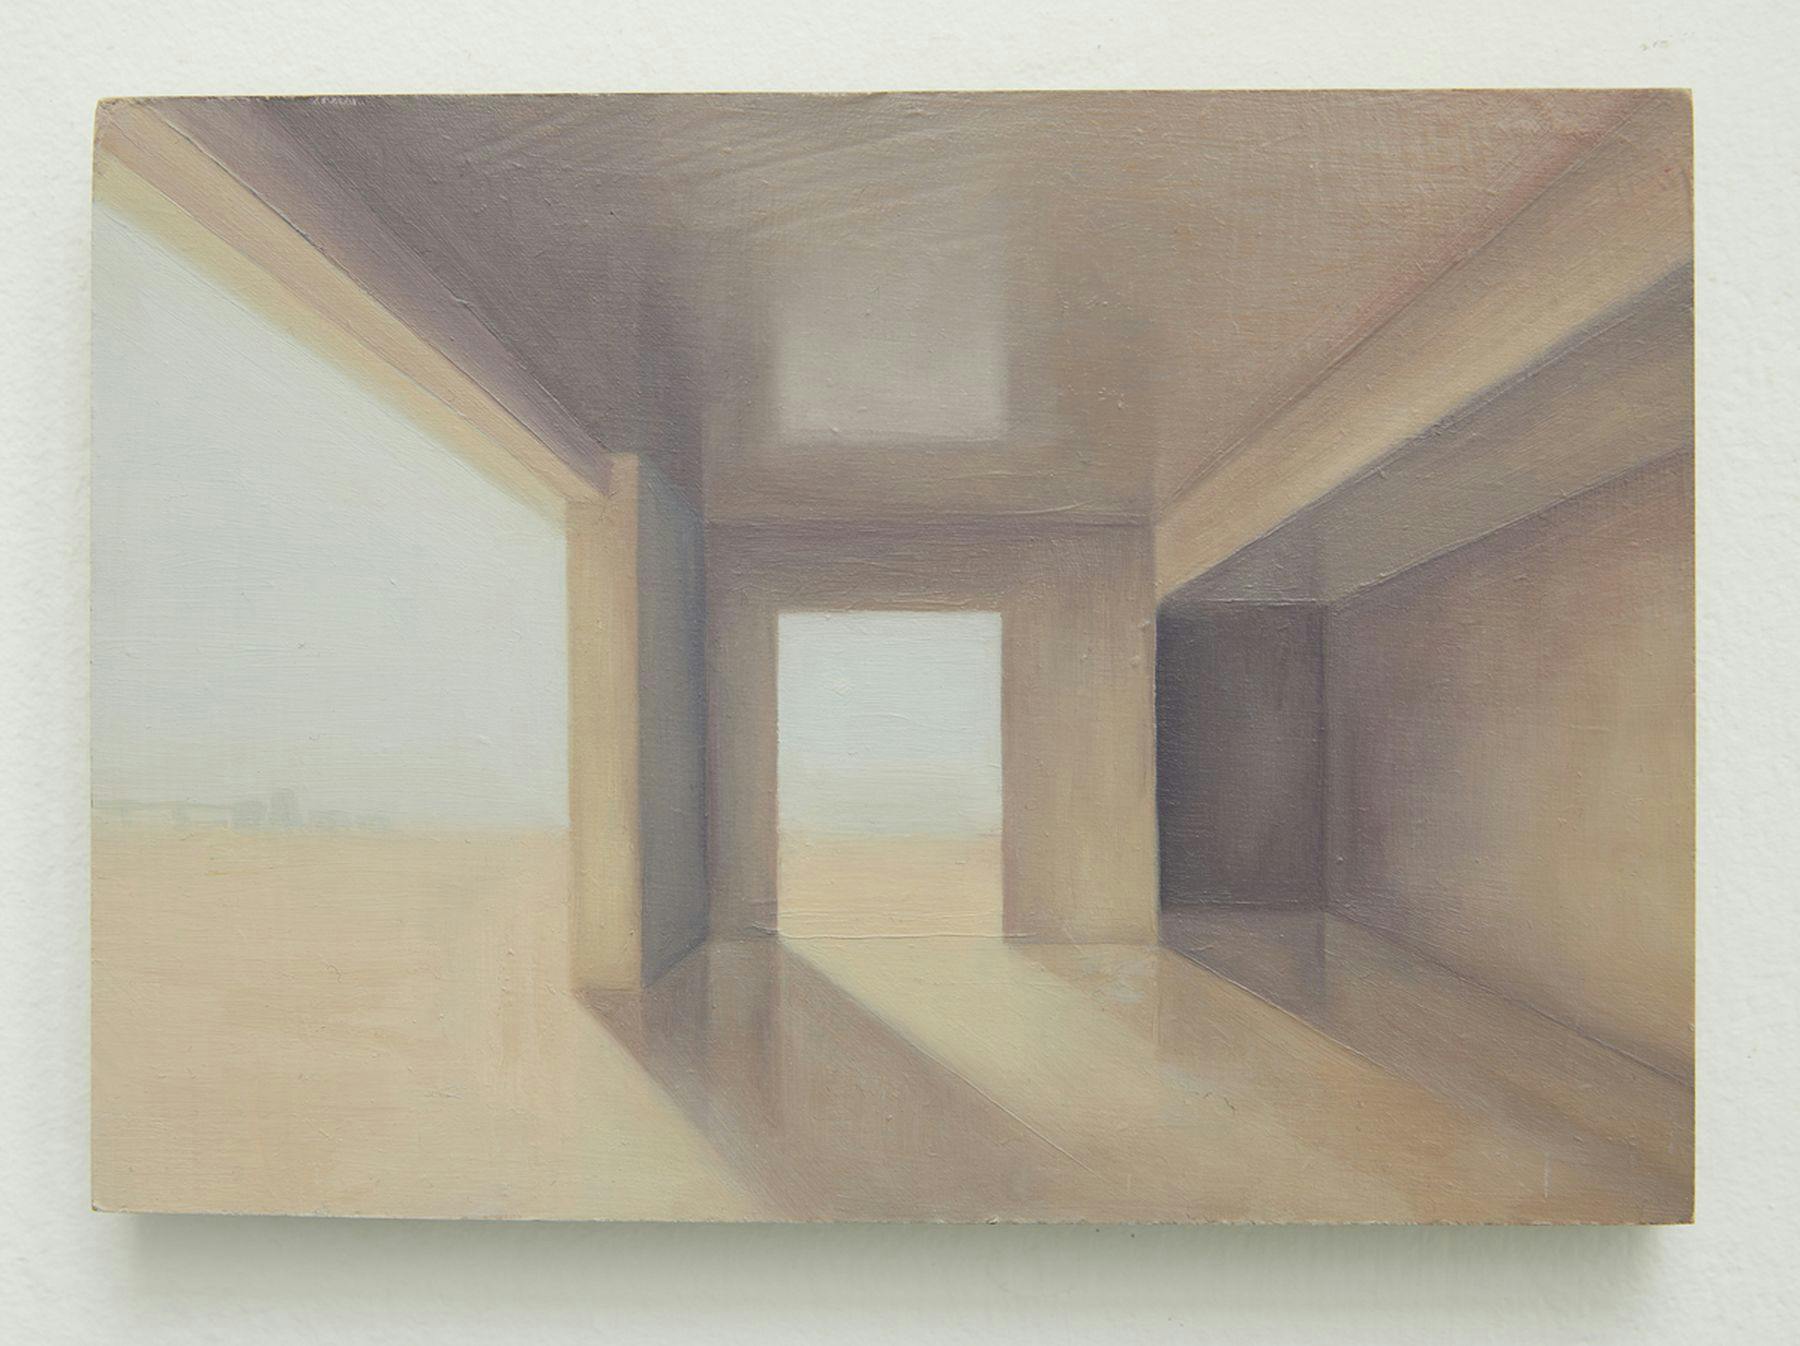 A photograph of a painting featuring an open space building structure with two entrance openings. They look out to an open space. The painting comprises of shades of cream and beige with slight shadows on the walls and floor.